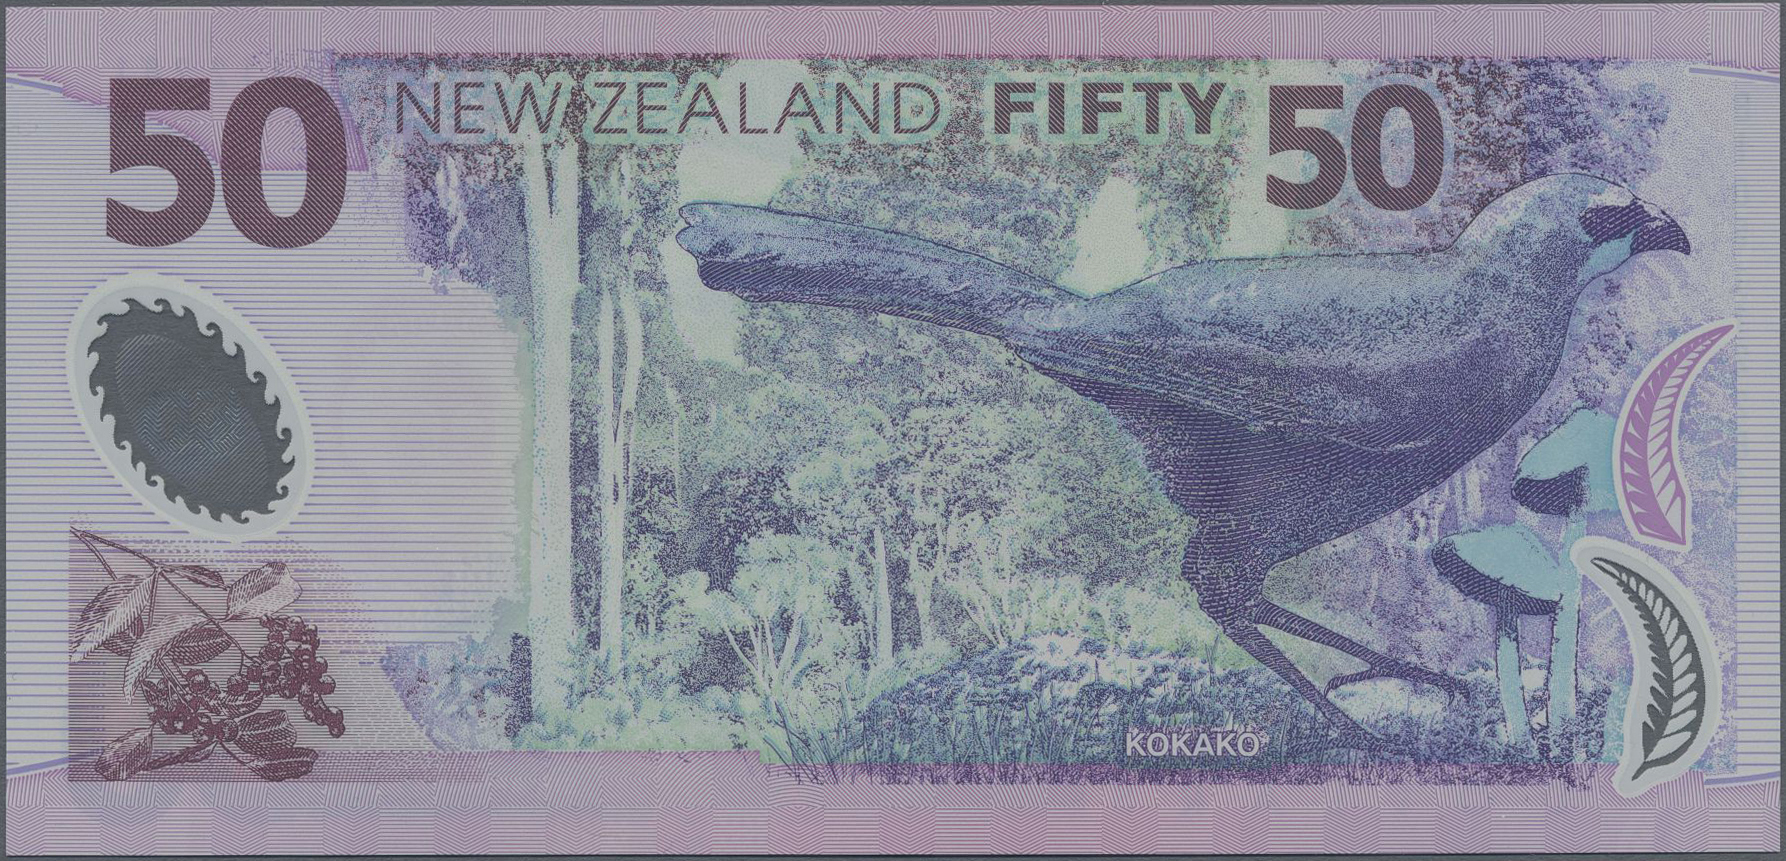 Lot 00350 - New Zealand / Neuseeland | Banknoten  -  Auktionshaus Christoph Gärtner GmbH & Co. KG 55th AUCTION - Day 1